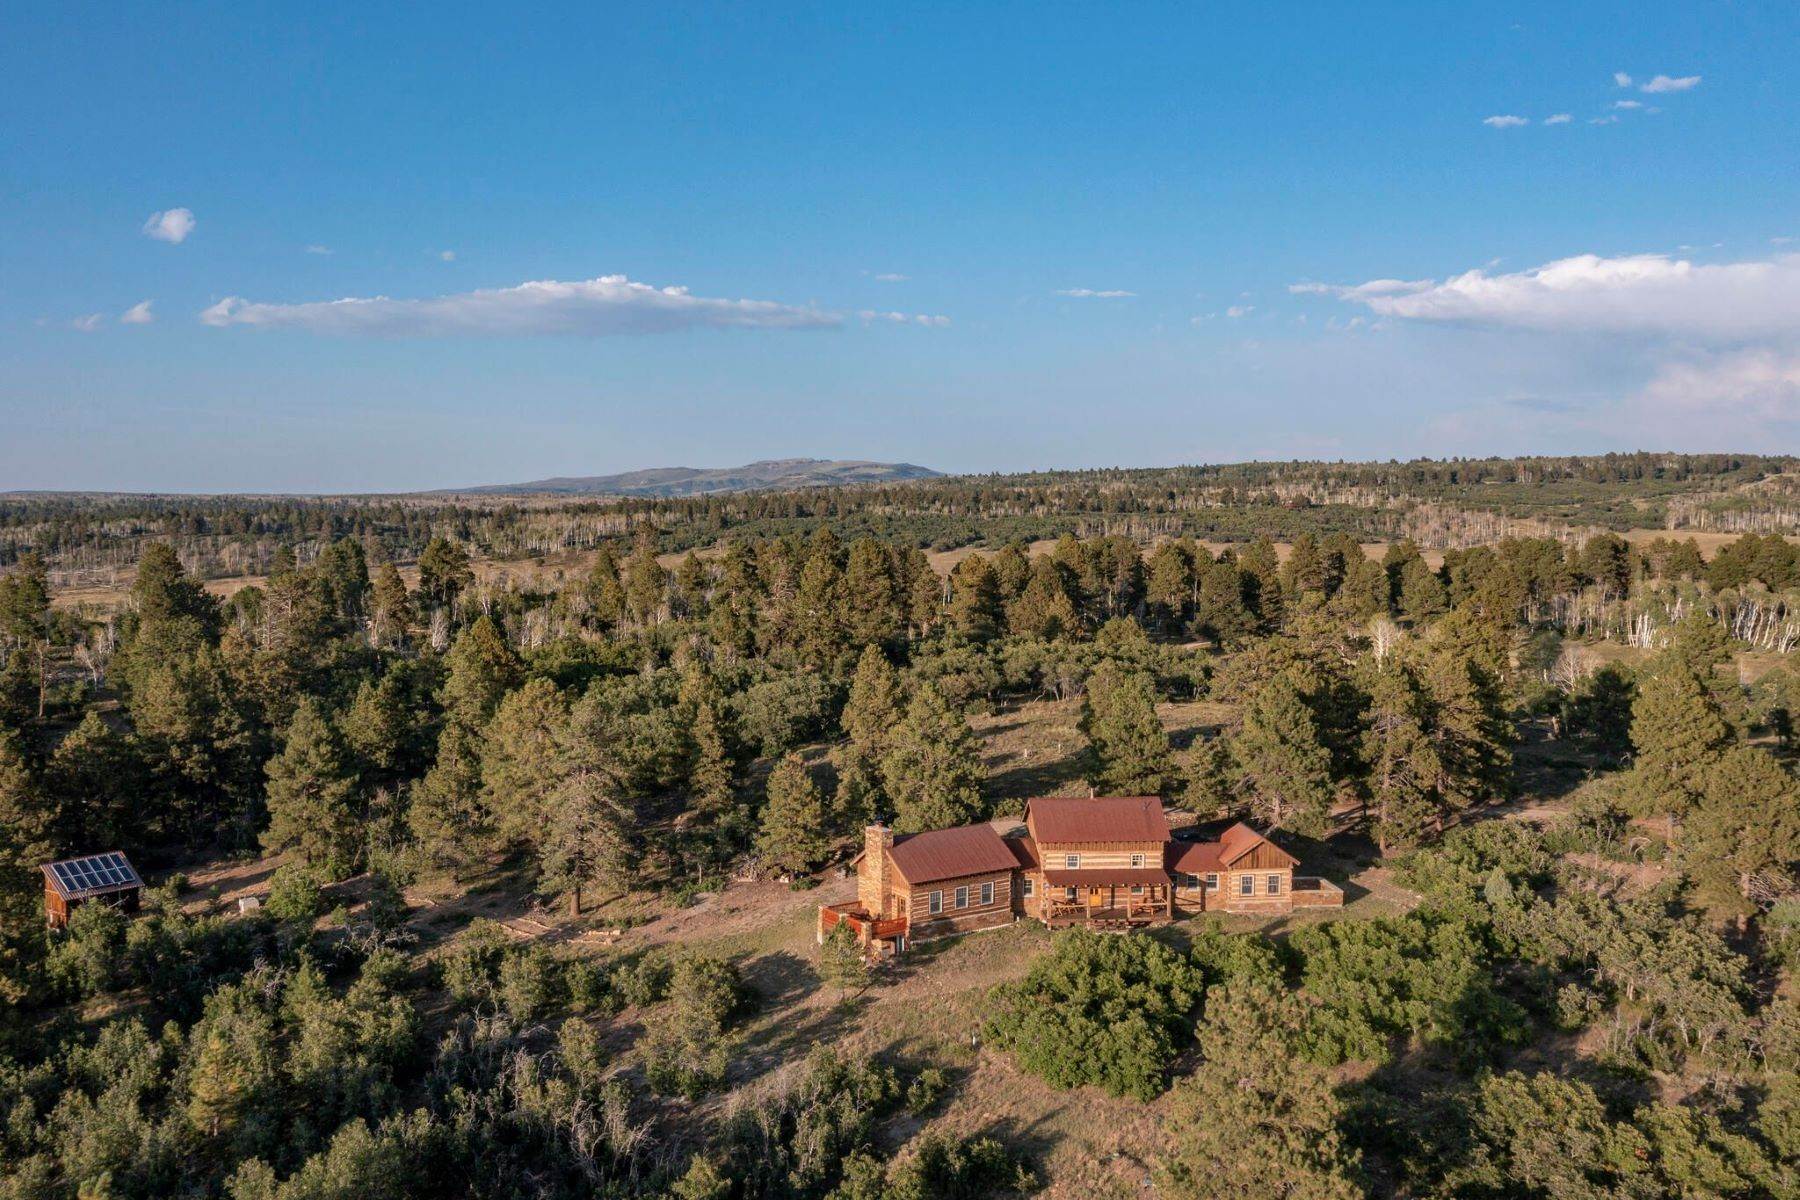 Farm and Ranch Properties for Sale at 1250 Mckenzie Springs Road, Placerville, Colorado, 81430 1250 McKenzie Springs Road + Parcel A Placerville, Colorado 81430 United States